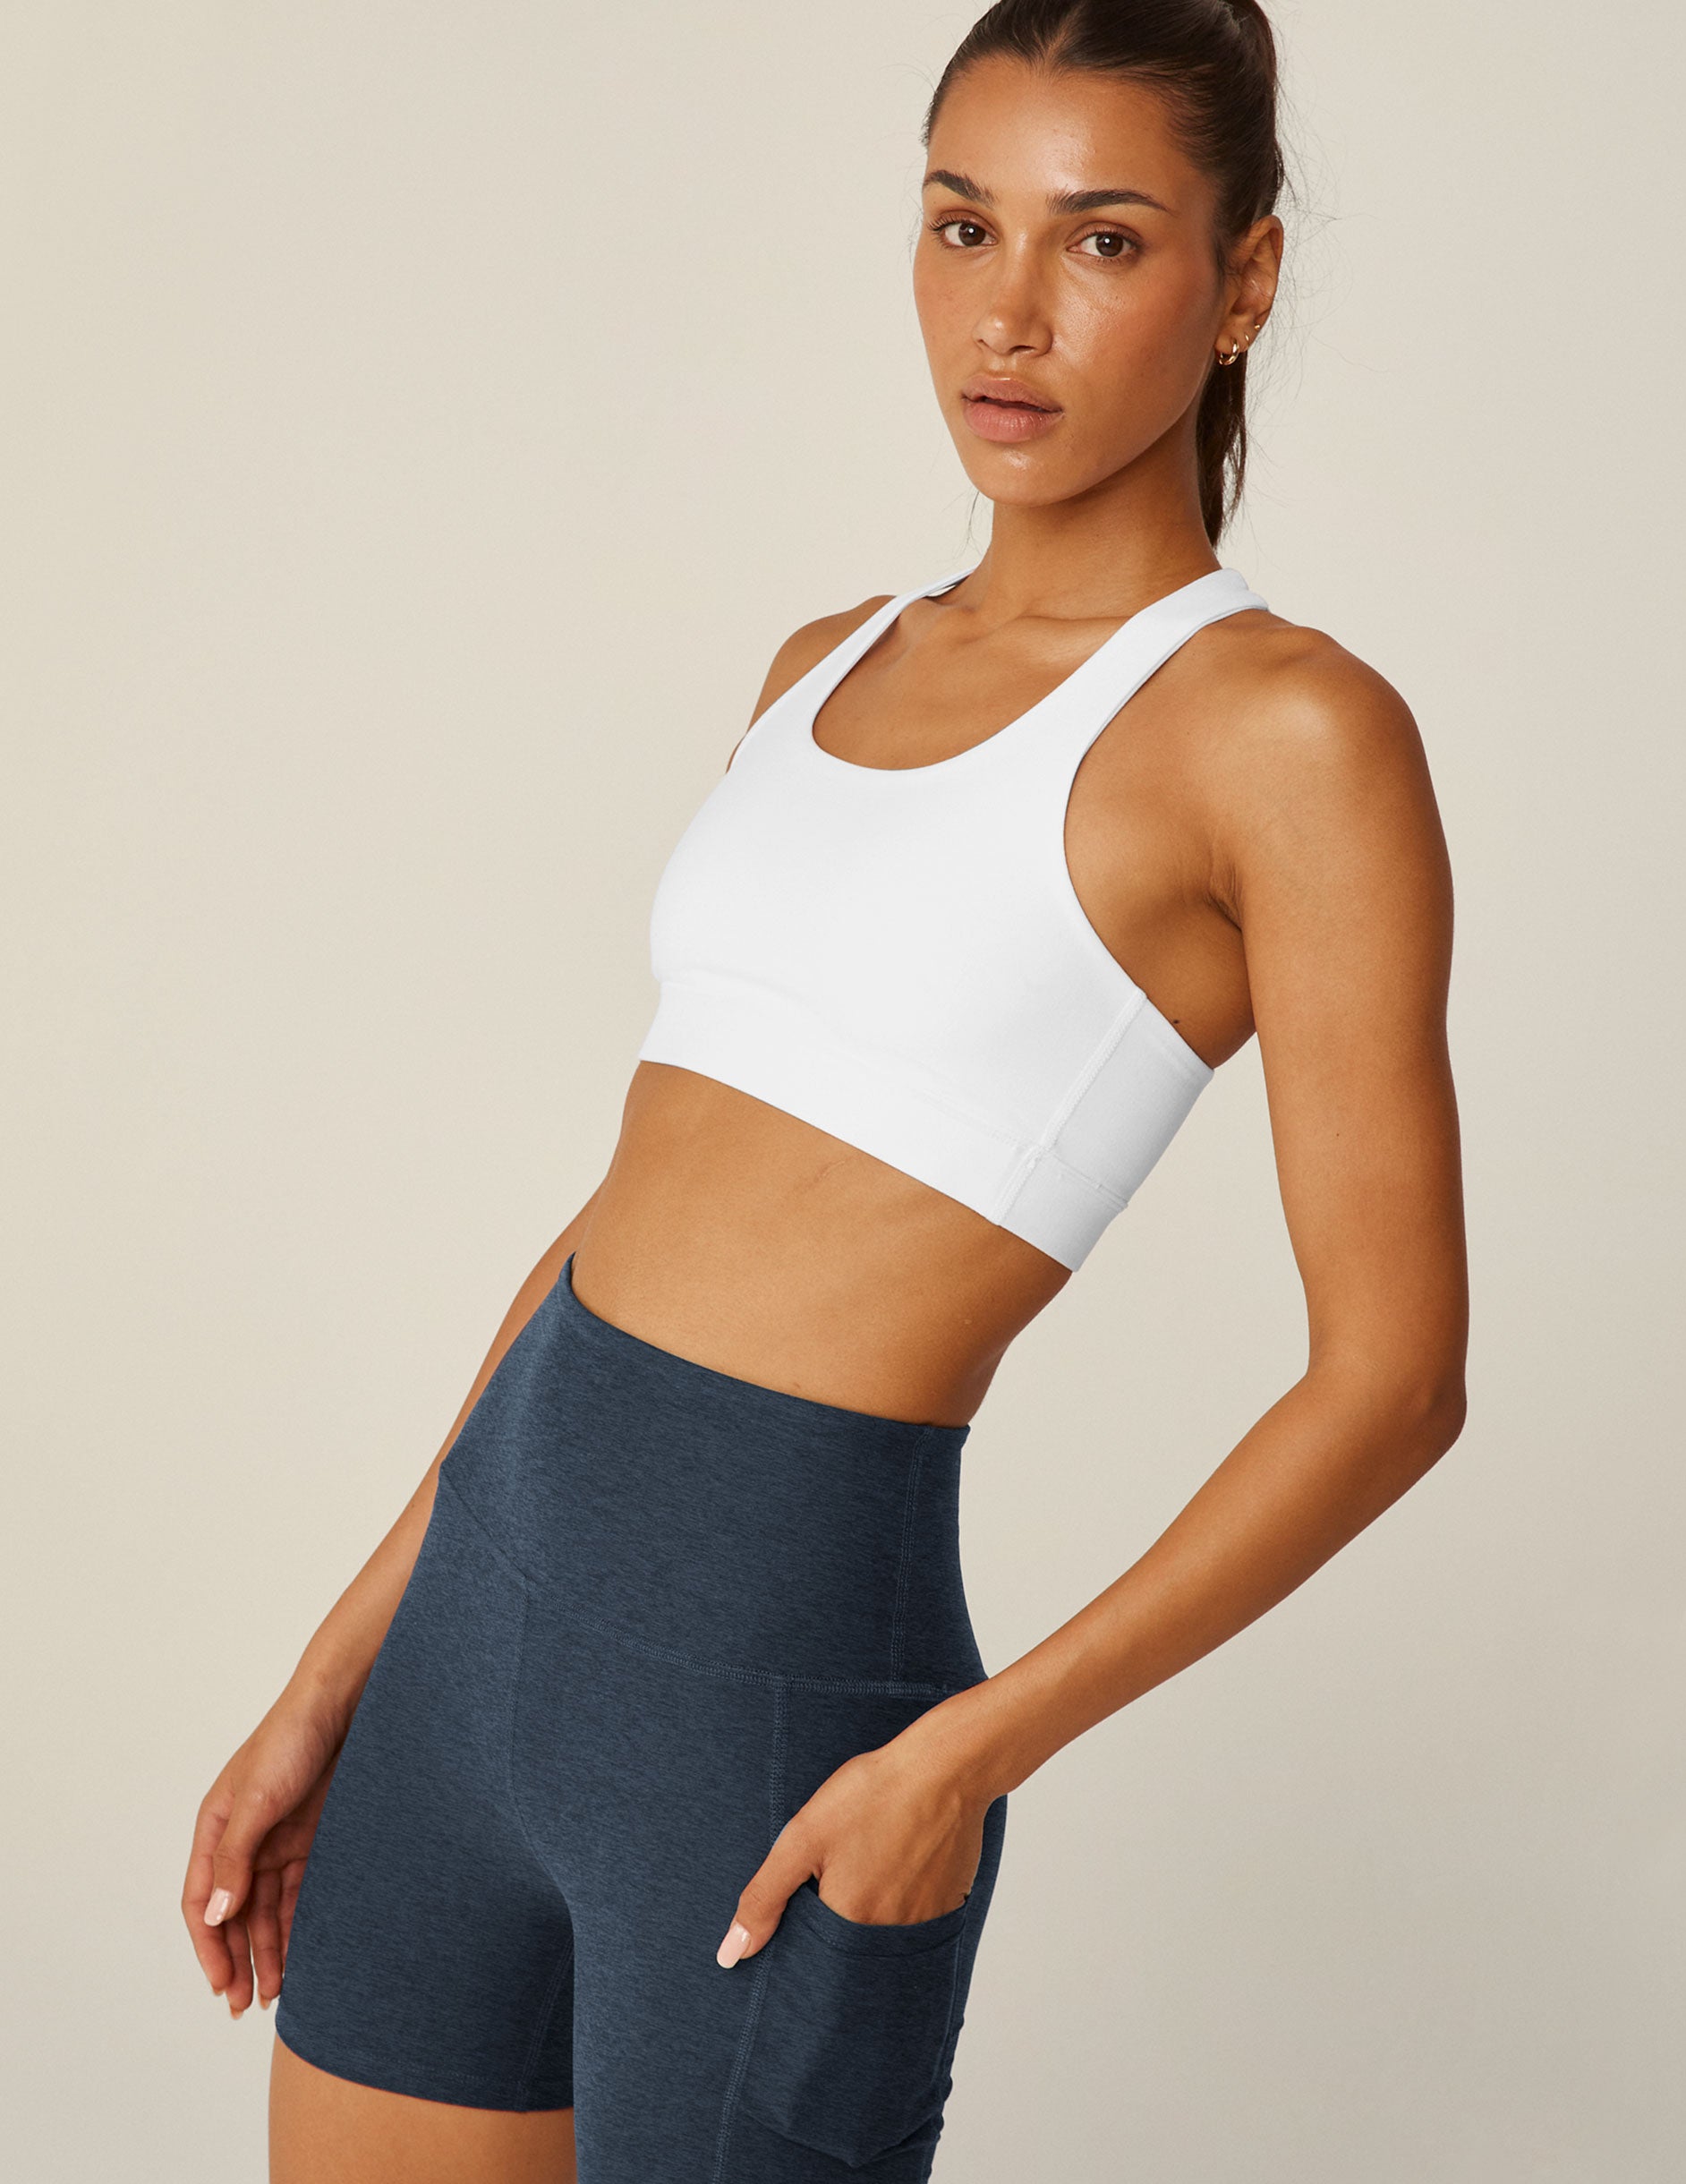 white bra top with a crossover detailing in the back.